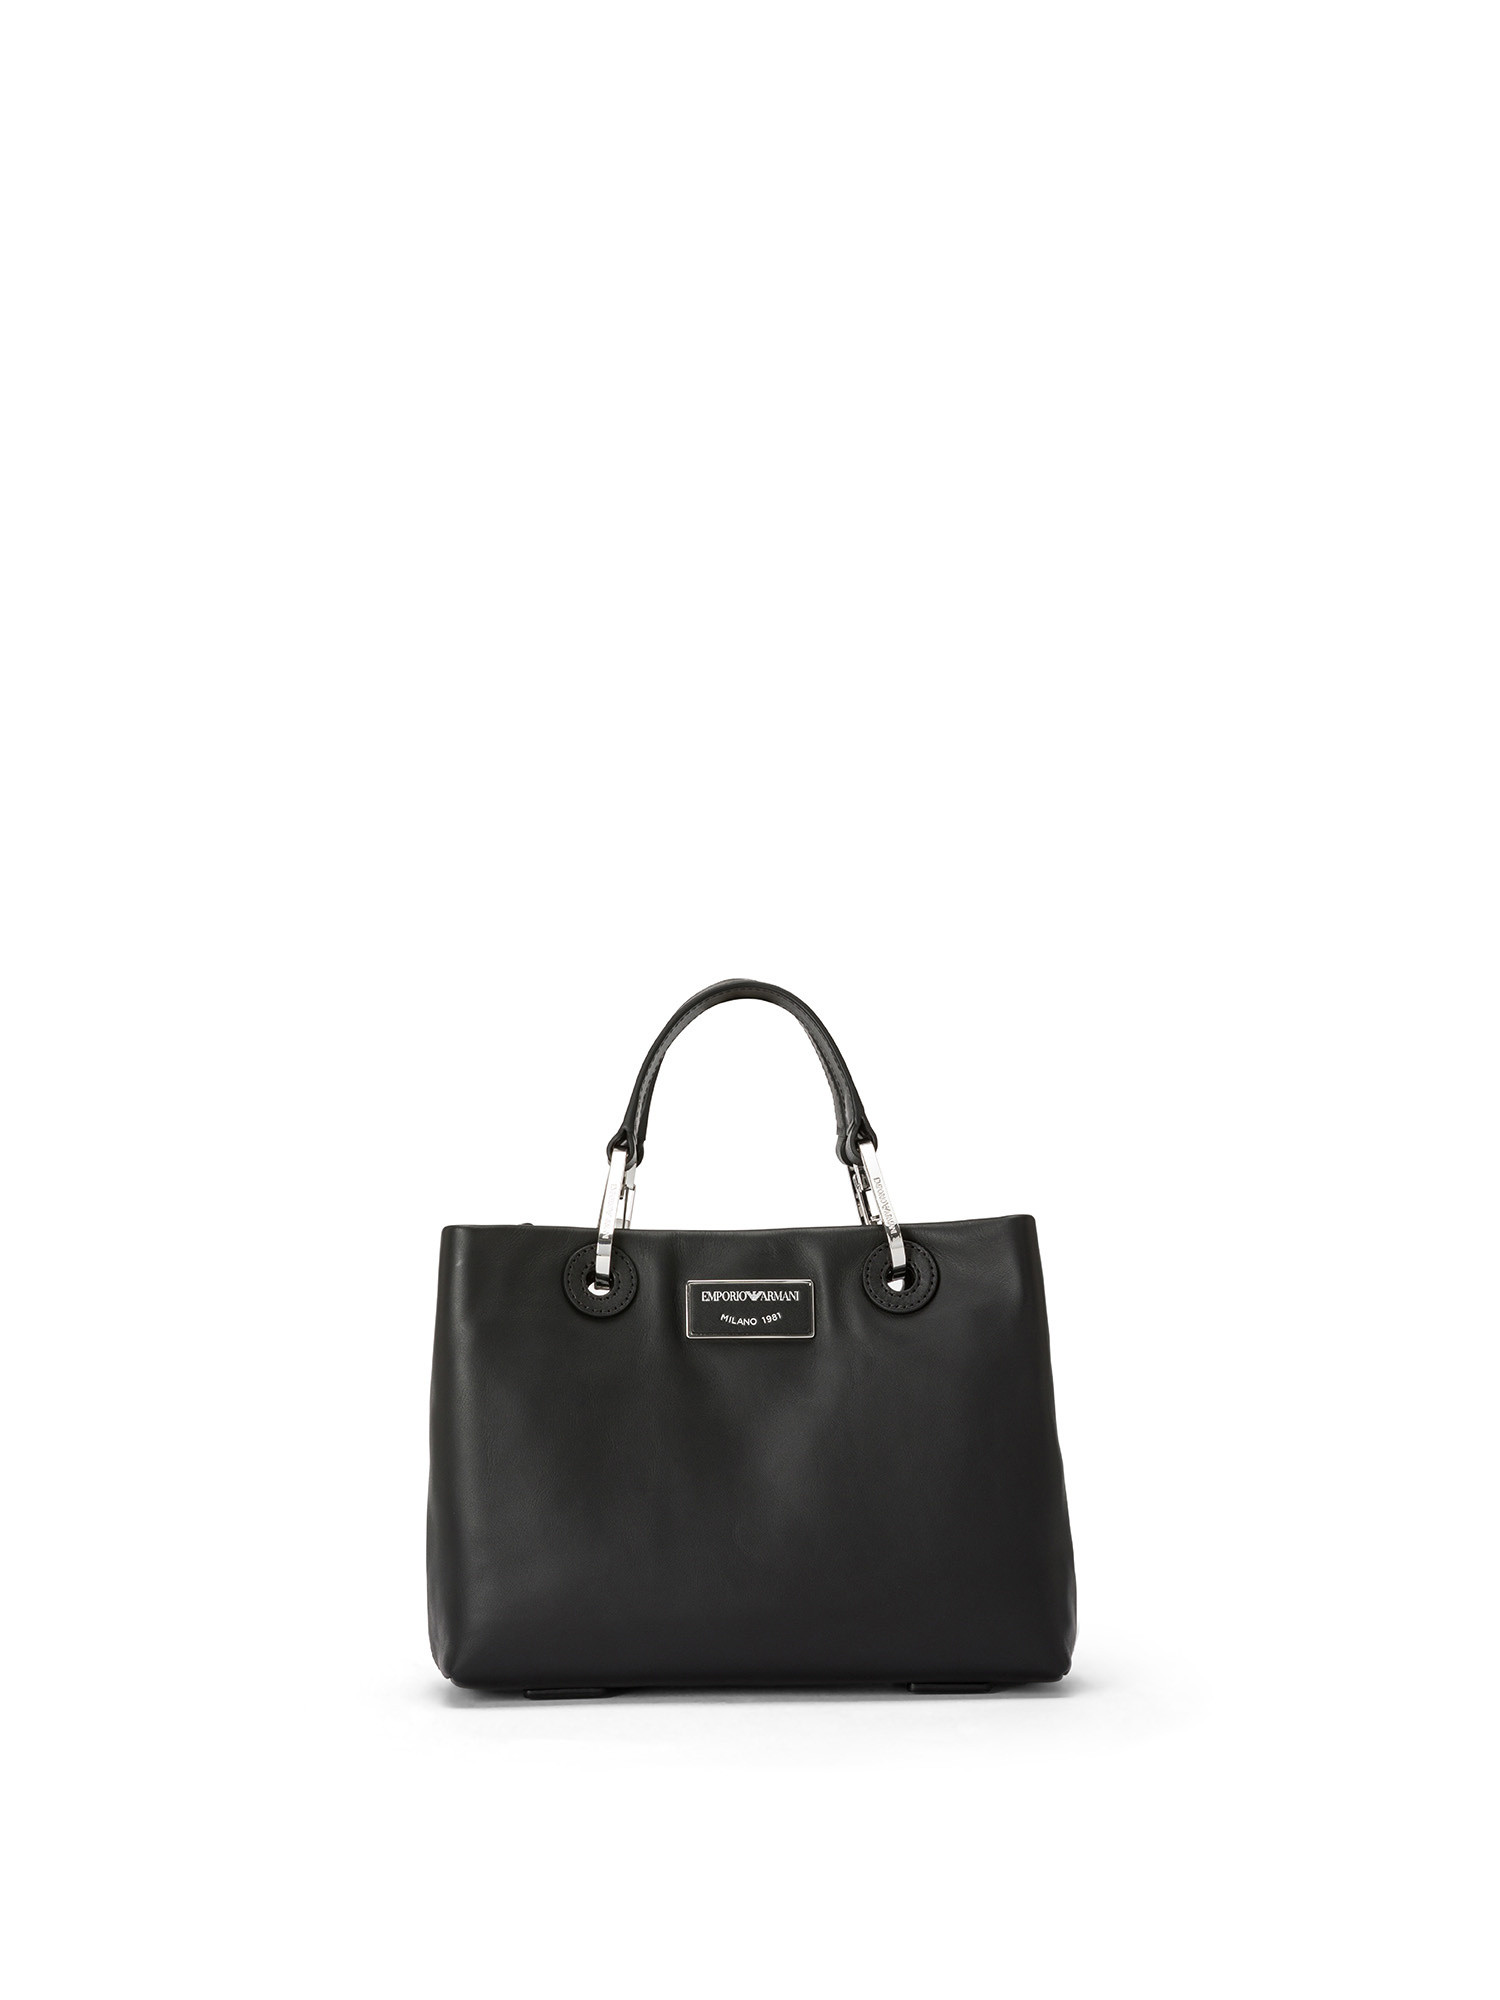 Emporio Armani - Small handbag in ecological leather, Black, large image number 0